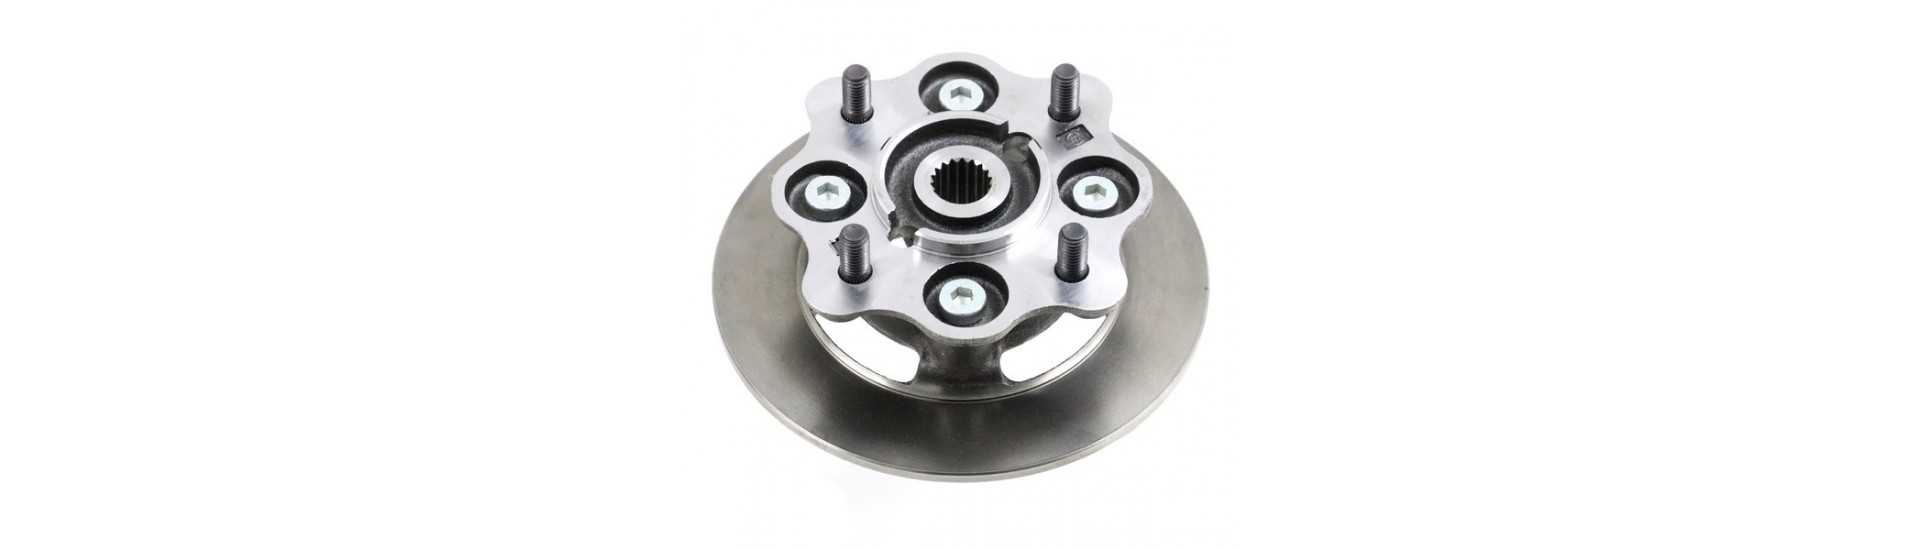 Wheel hub + brake disc at the best car price without license